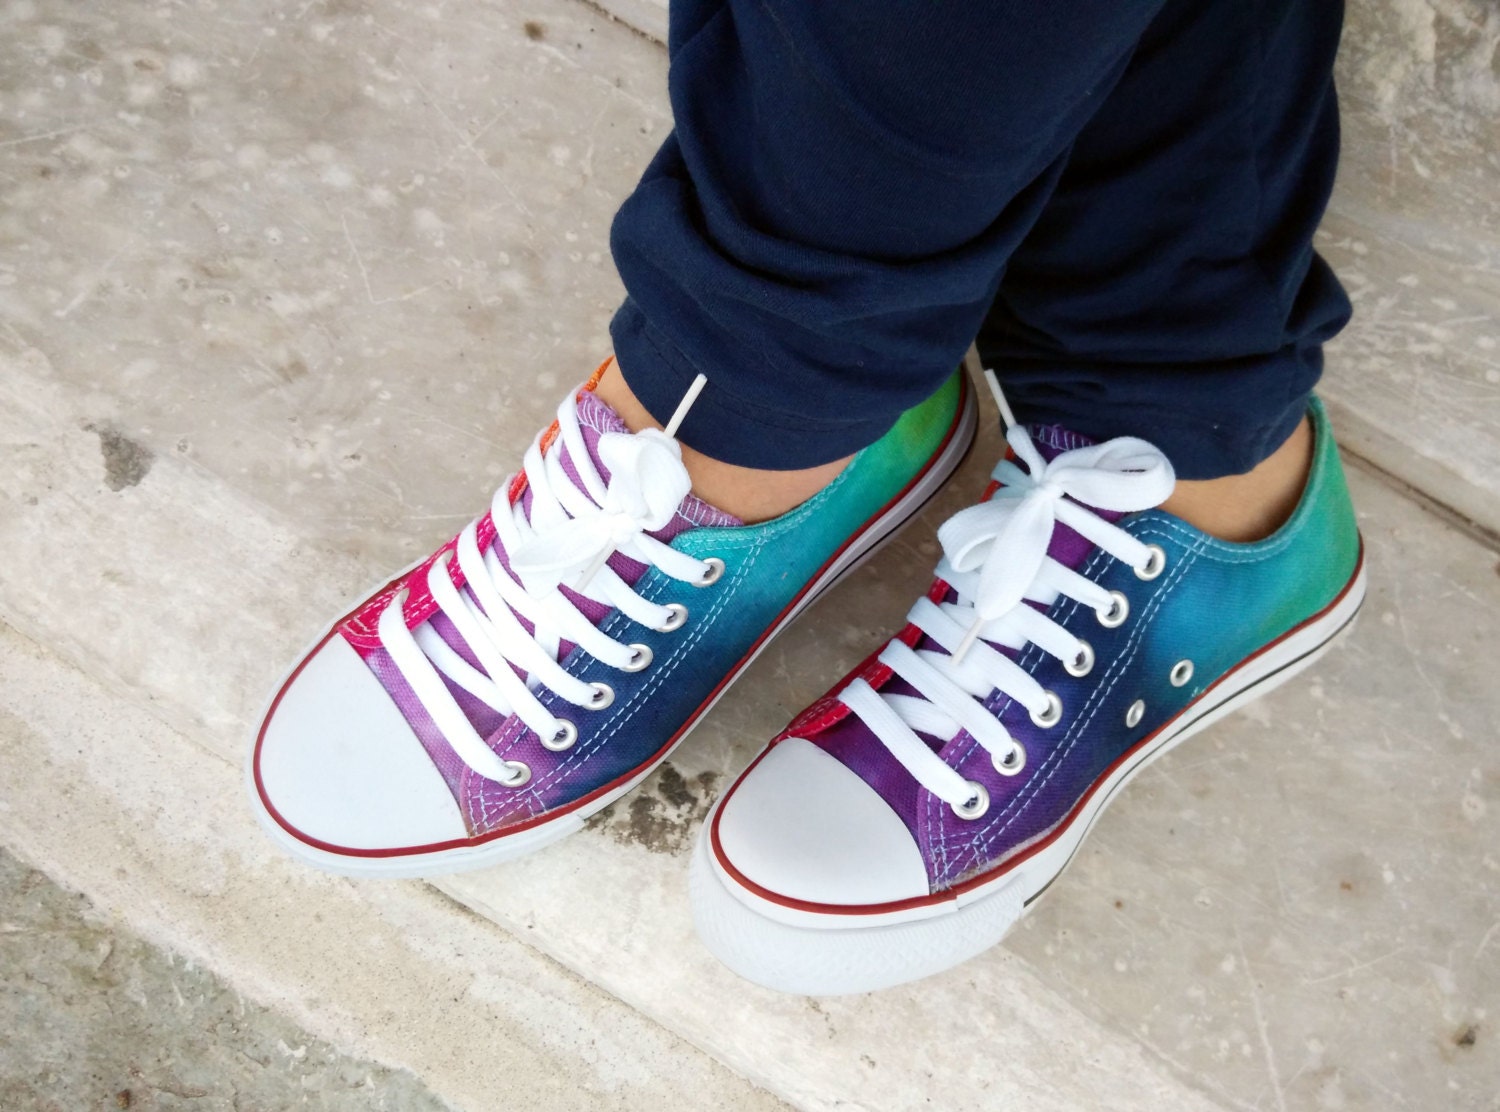 converse shoes tie style